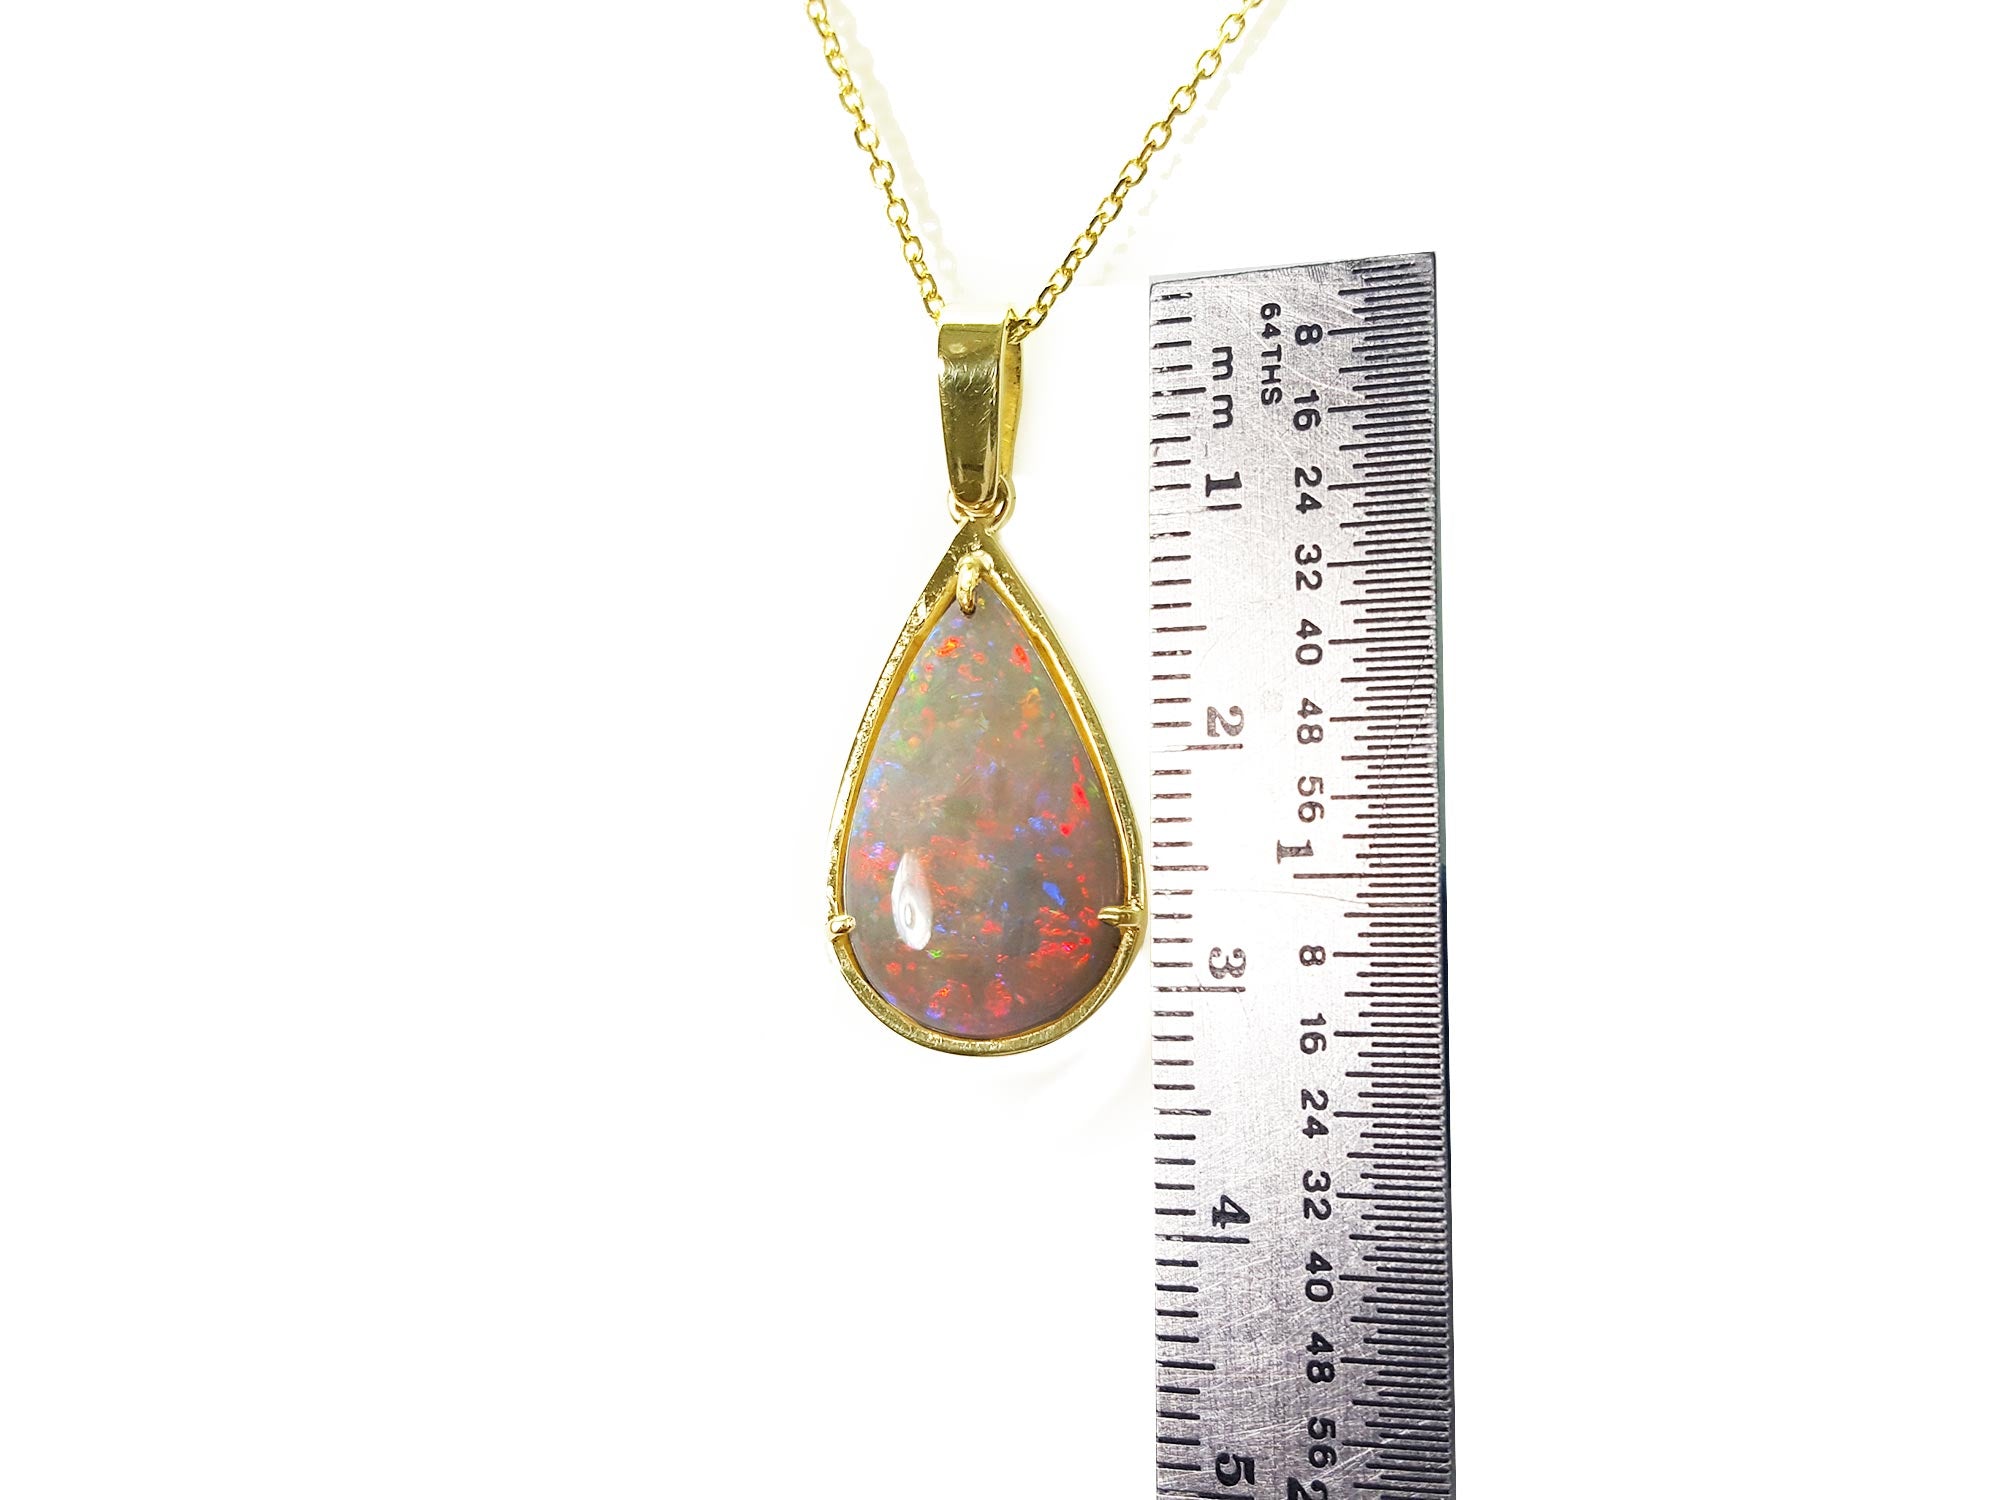 Solid opal necklace pendant 